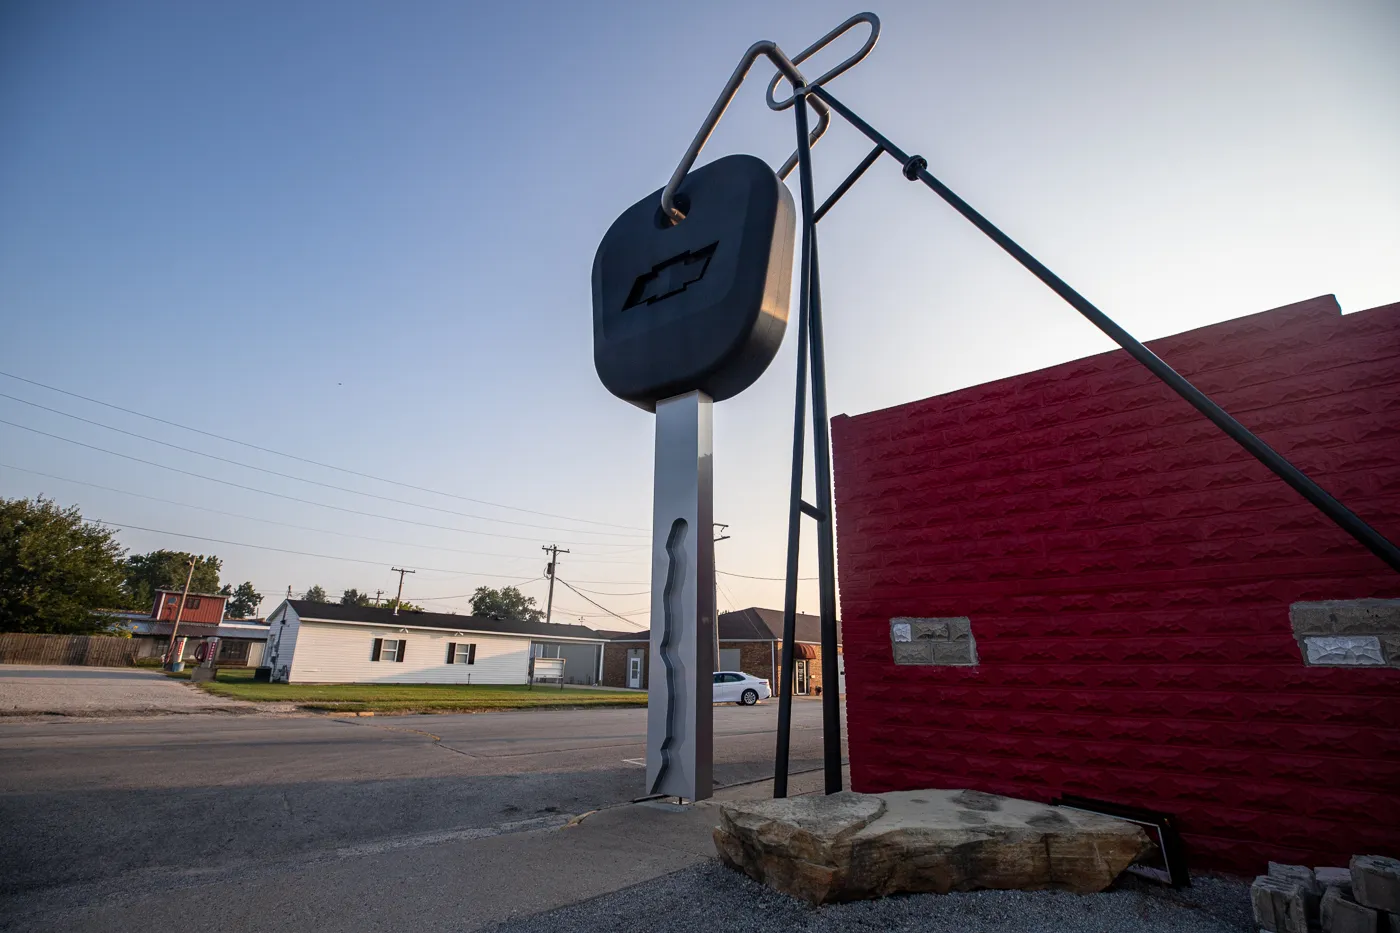 World's Largest Key in Casey, Illinois roadside attraction